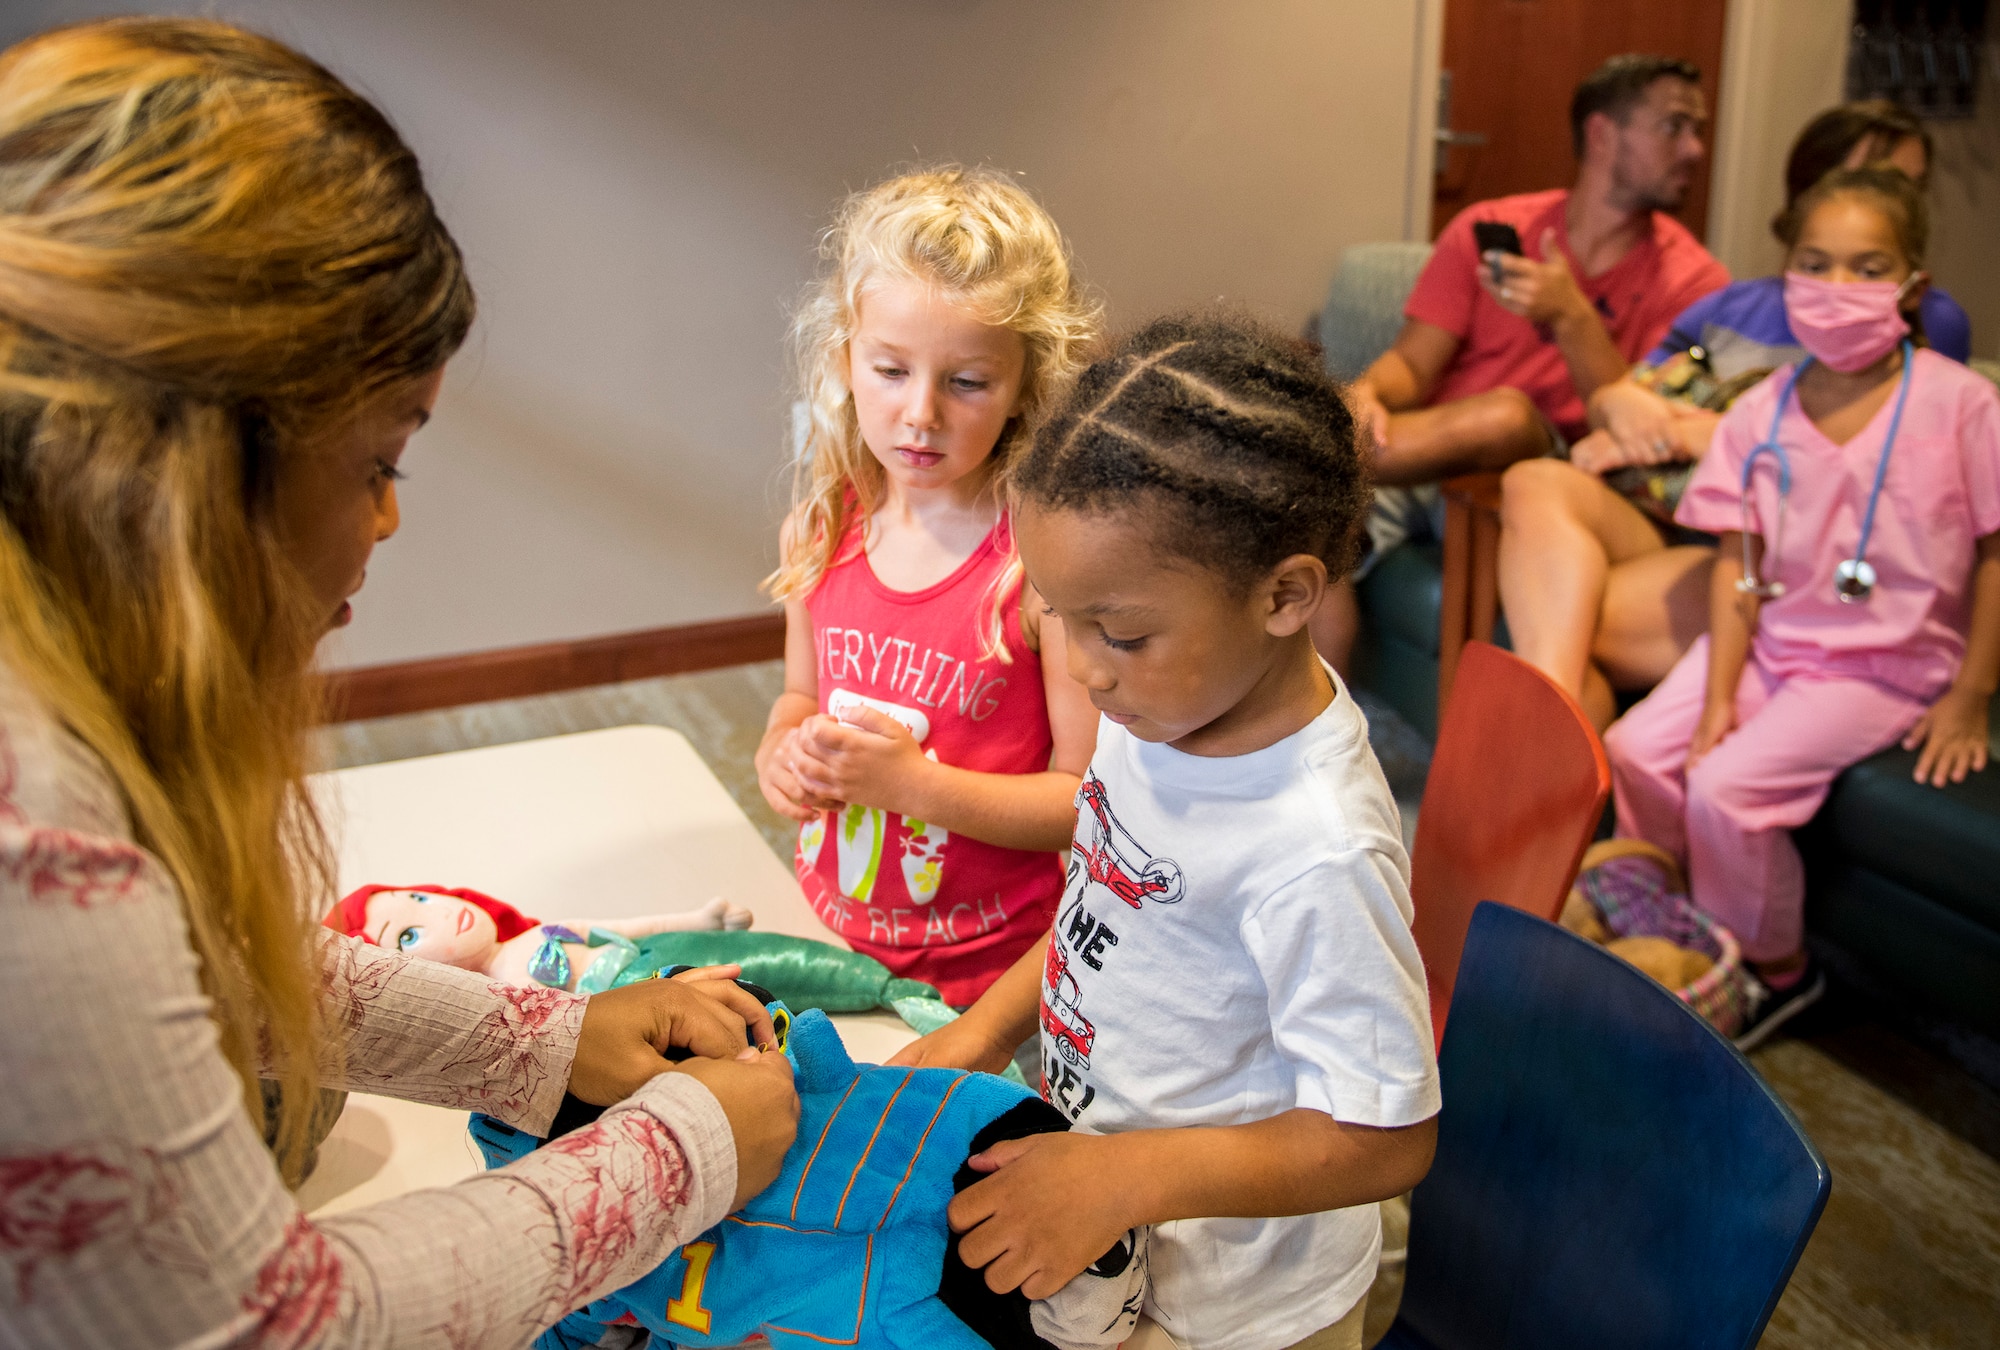 The 96th Medical Group's pediatric clinic hosted 127 children during their first Teddy Bear Clinic to educate them about hospital procedures and to demonstrate what they may expect if they need to see a doctor.